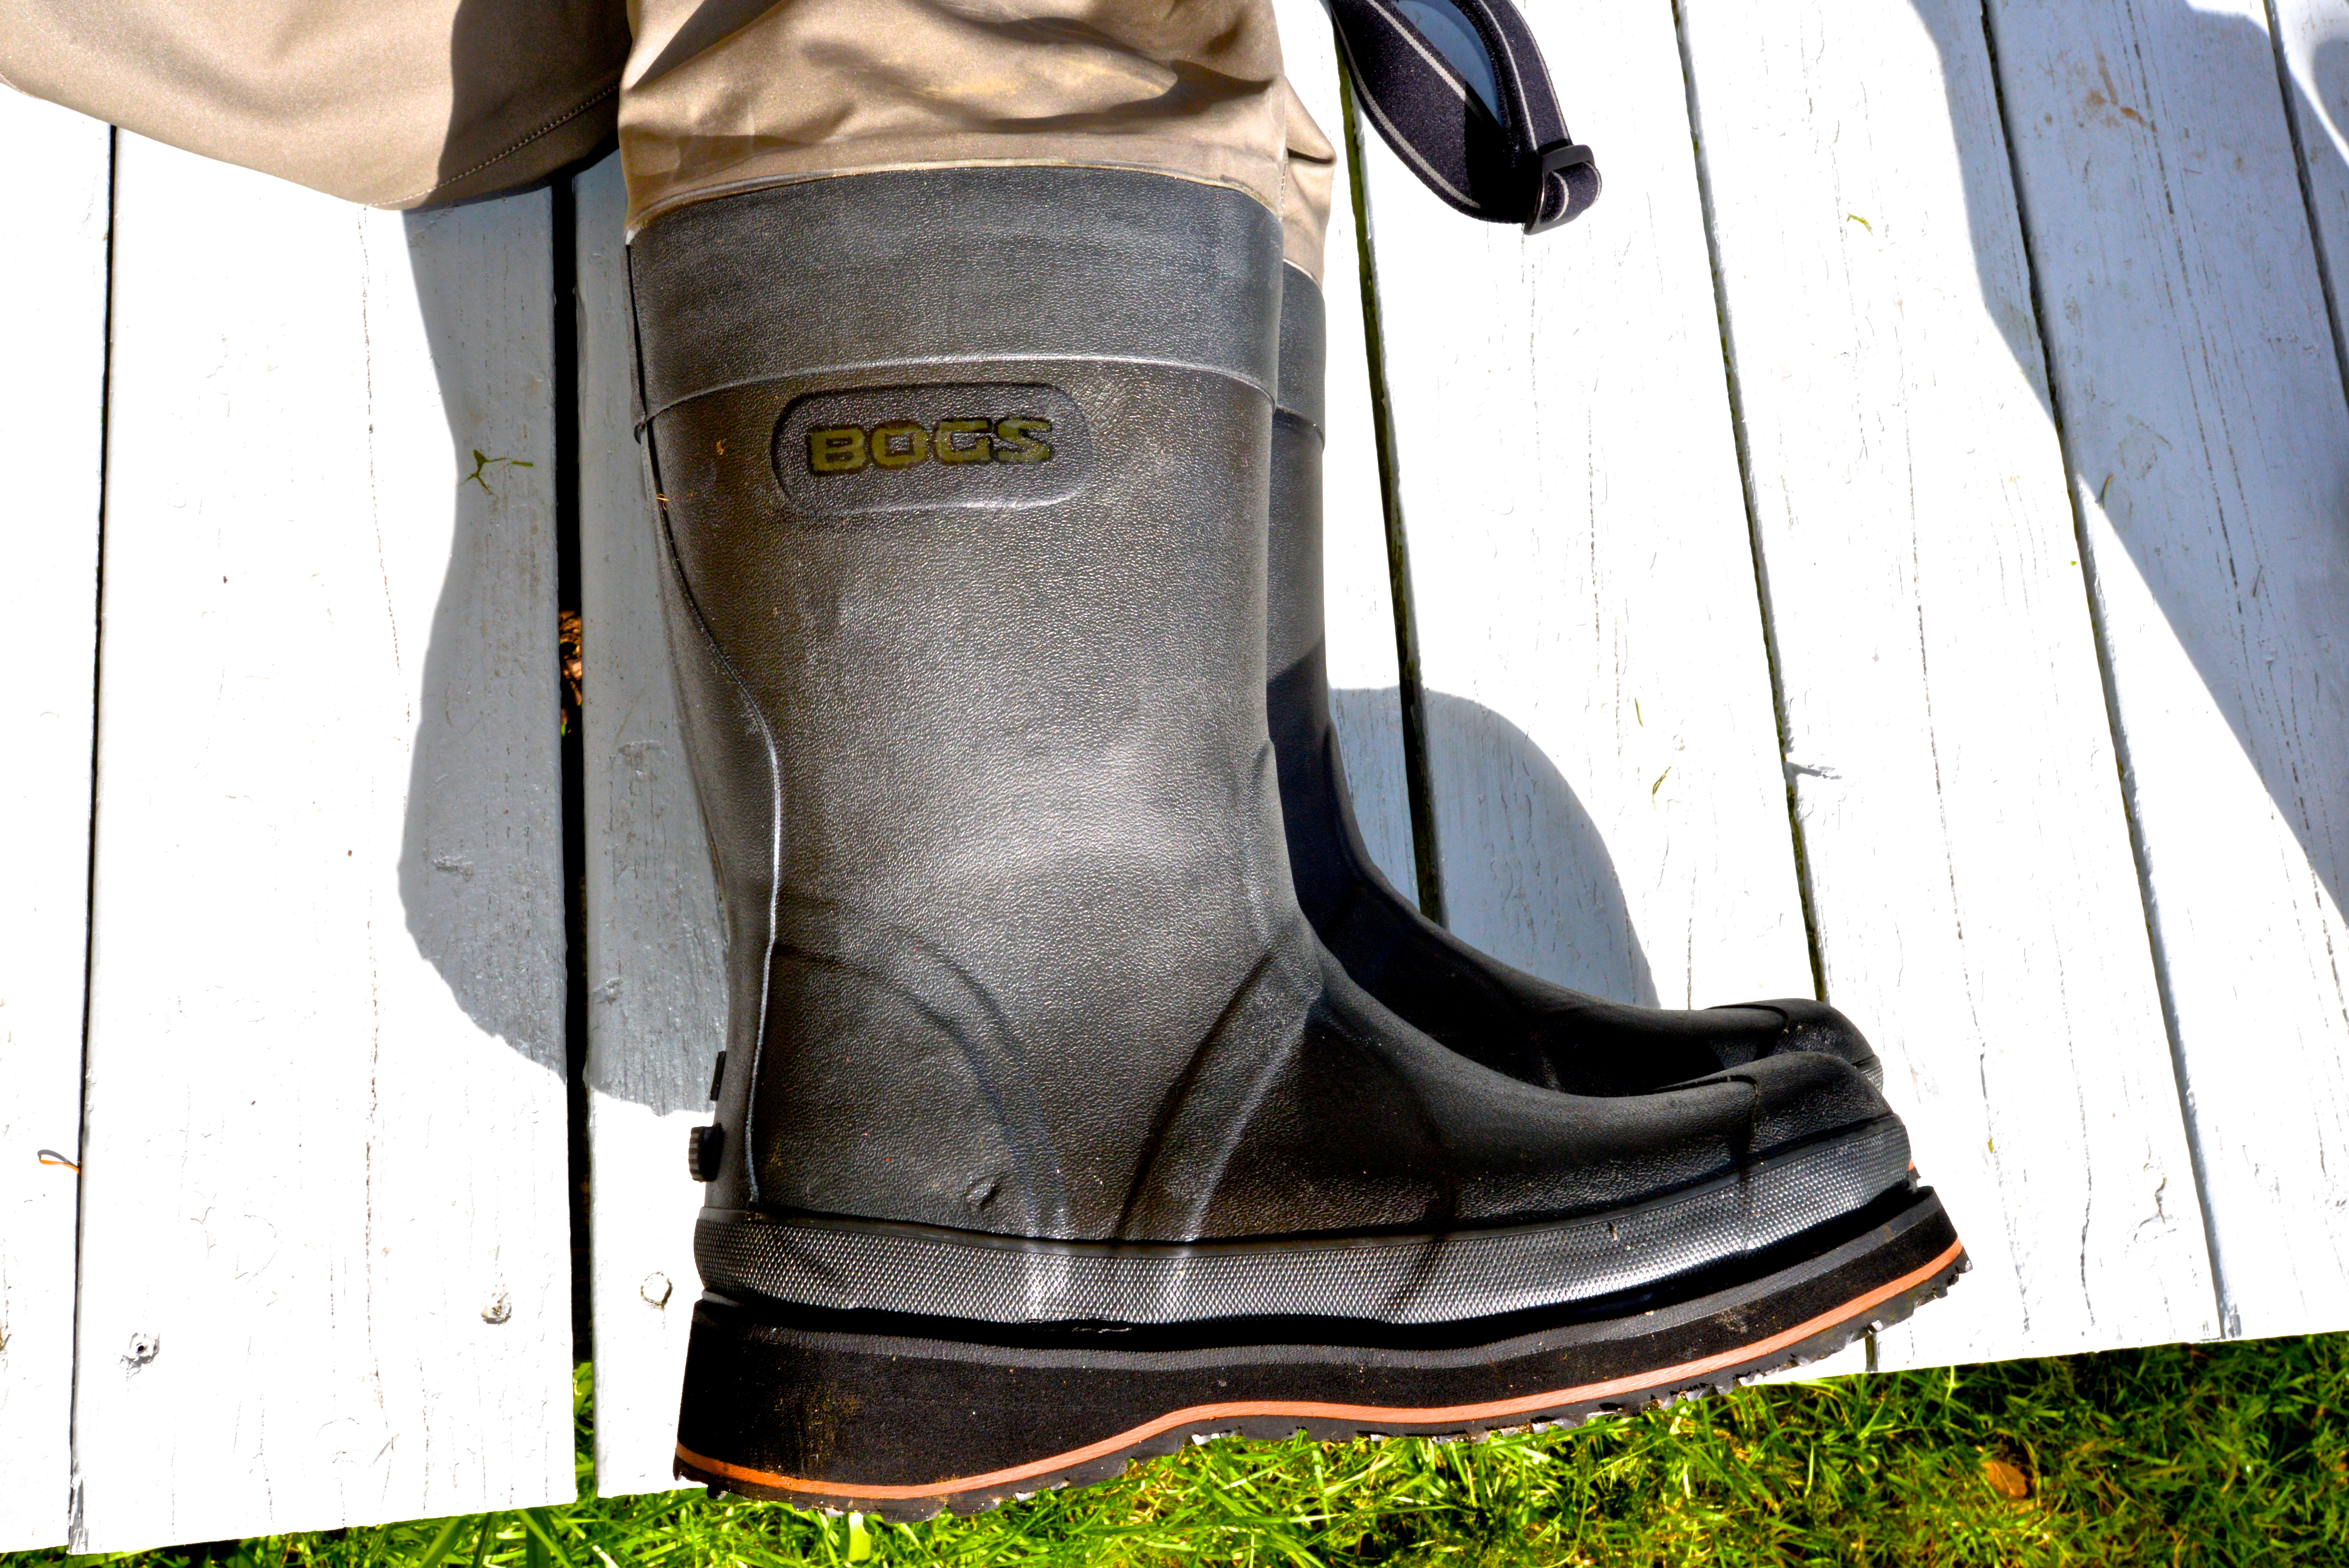 SIMMS G3 Boot Foot Guide Wader Review: Five Star Performance